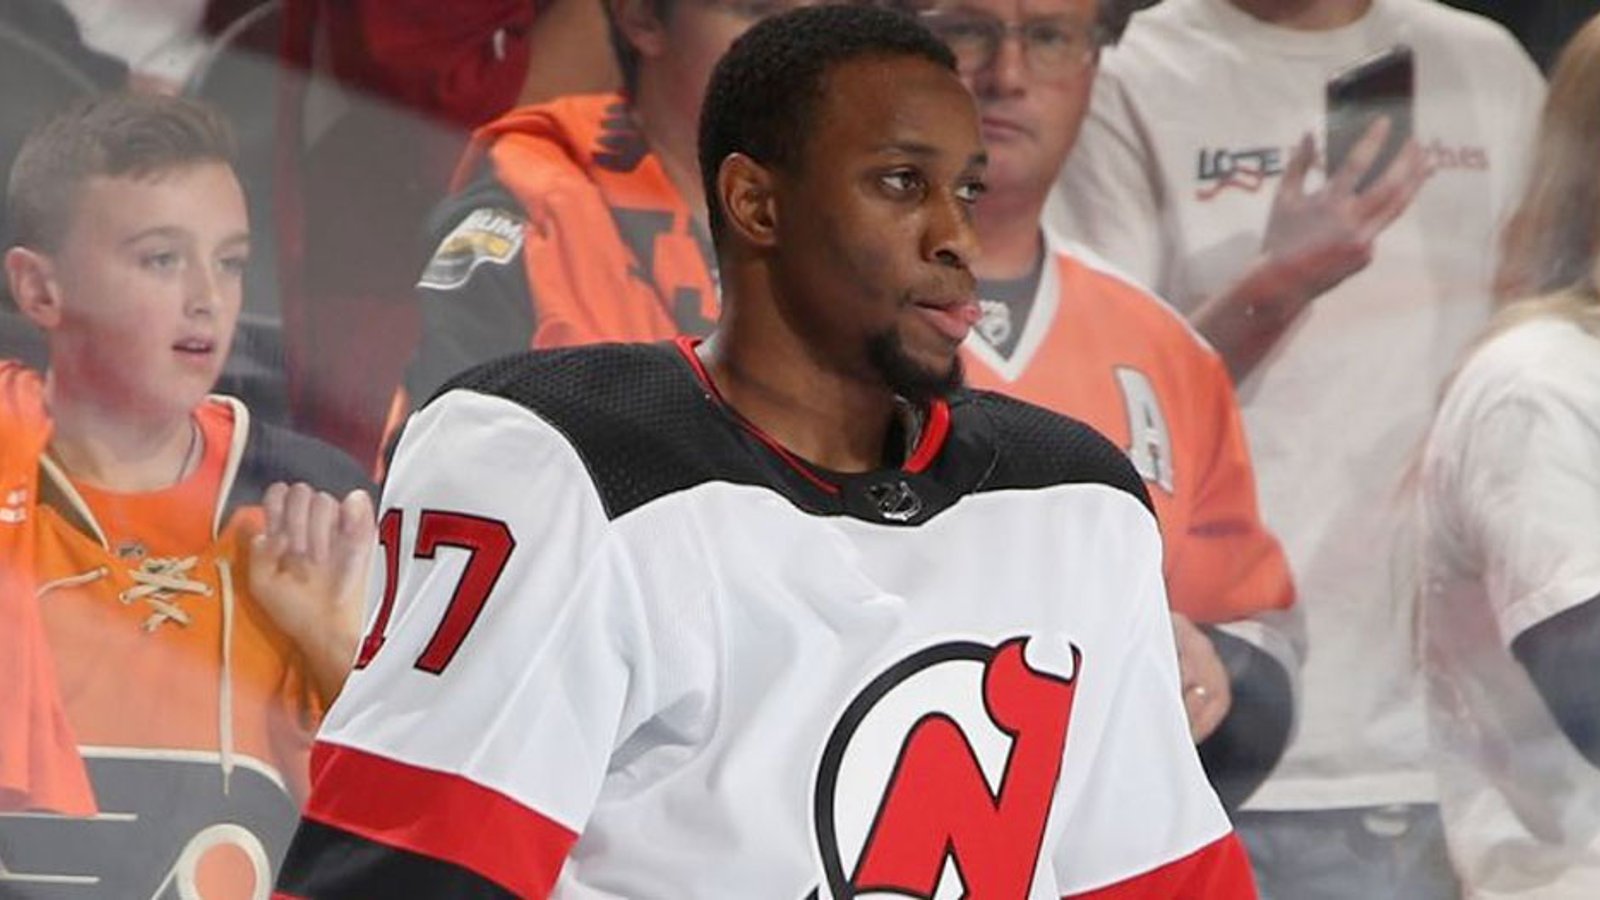 Wayne Simmonds issues his own statement on Aliu’s allegations and racism in the NHL